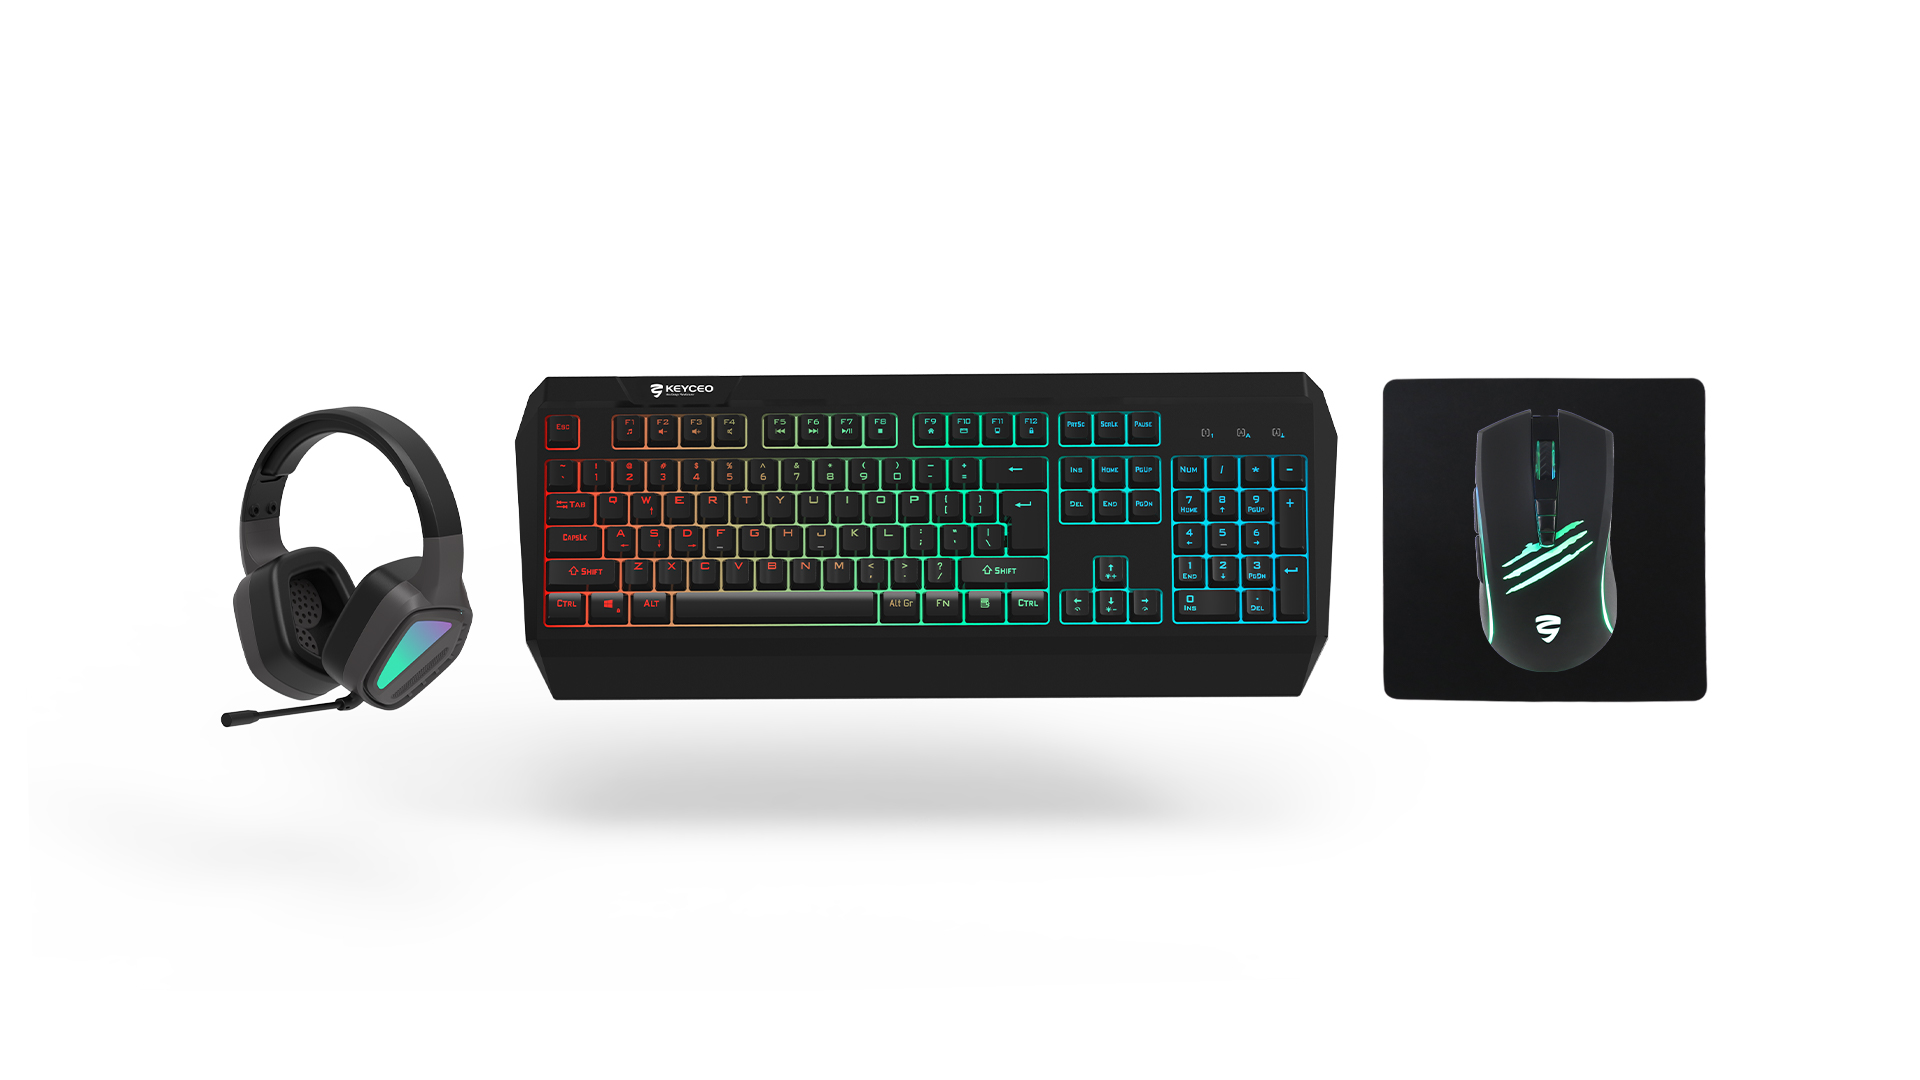 OMG-Wireless RGB combo 4 in 1 game combination